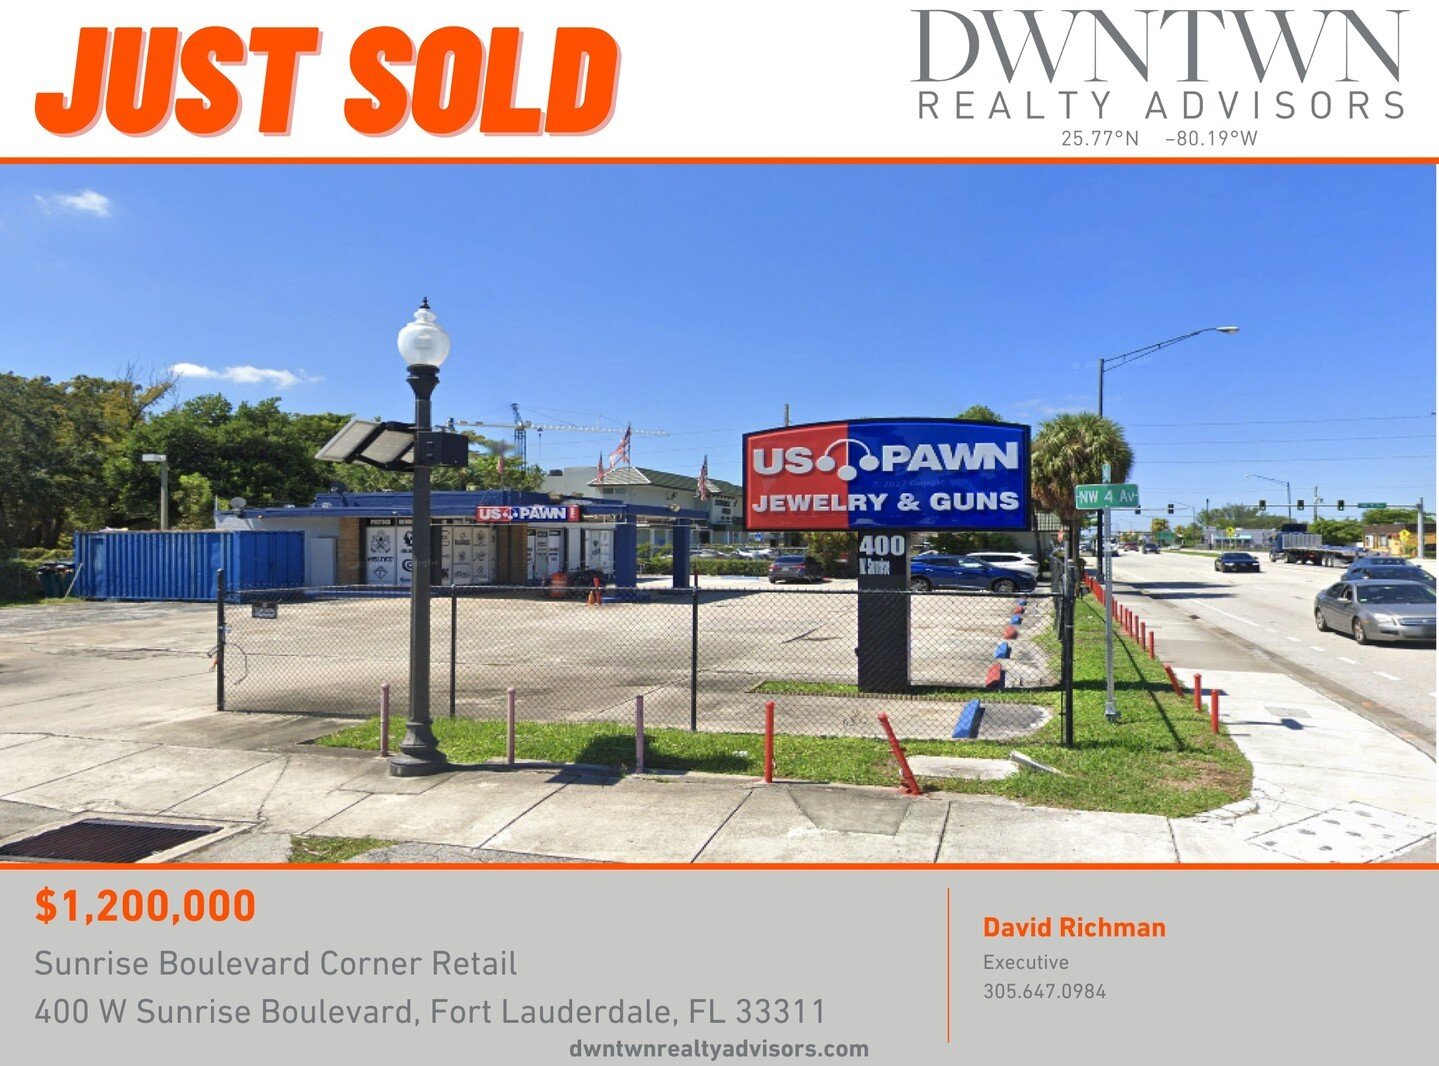 JUST SOLD FOR $1,200,000 | Sunrise Boulevard Corner Retail in Fort Lauderdale

DWNTWN Realty Advisors is pleased to announce the succesful sale of 400 W Sunrise Boulevard, in Fort Lauderdale, FL.T he subject property is a single-tenant retail propert